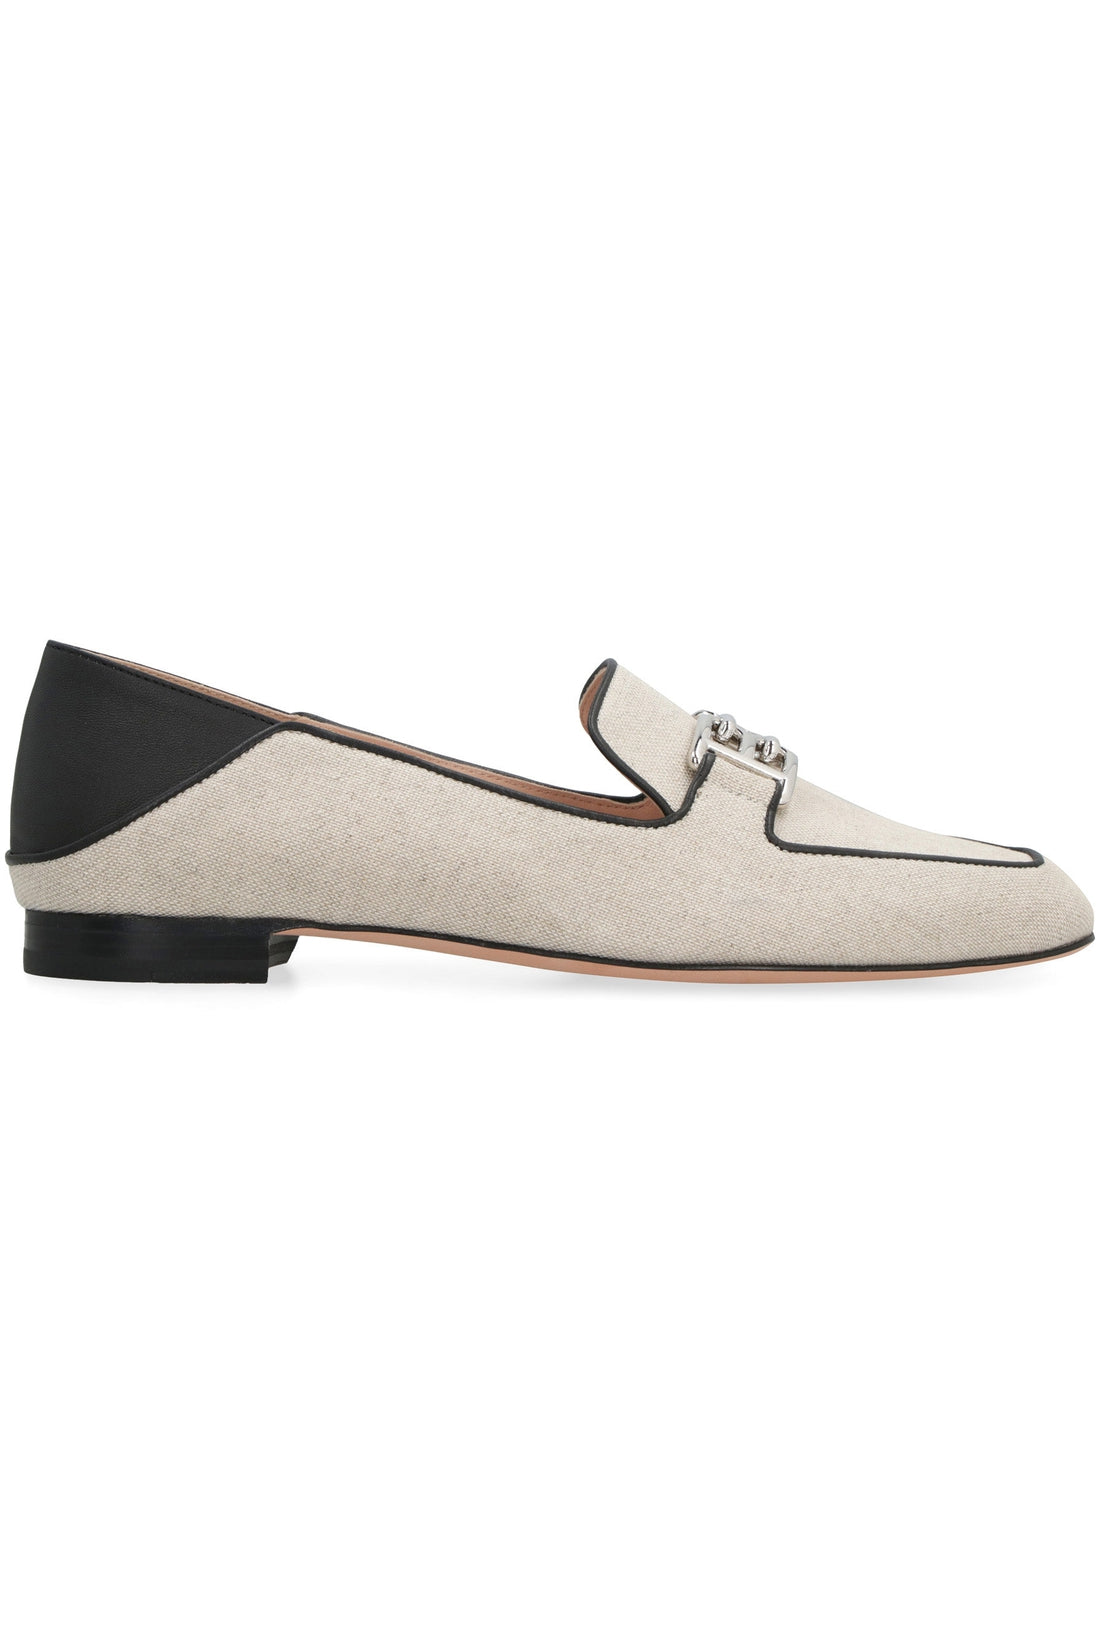 Bally-OUTLET-SALE-Ellah loafers-ARCHIVIST